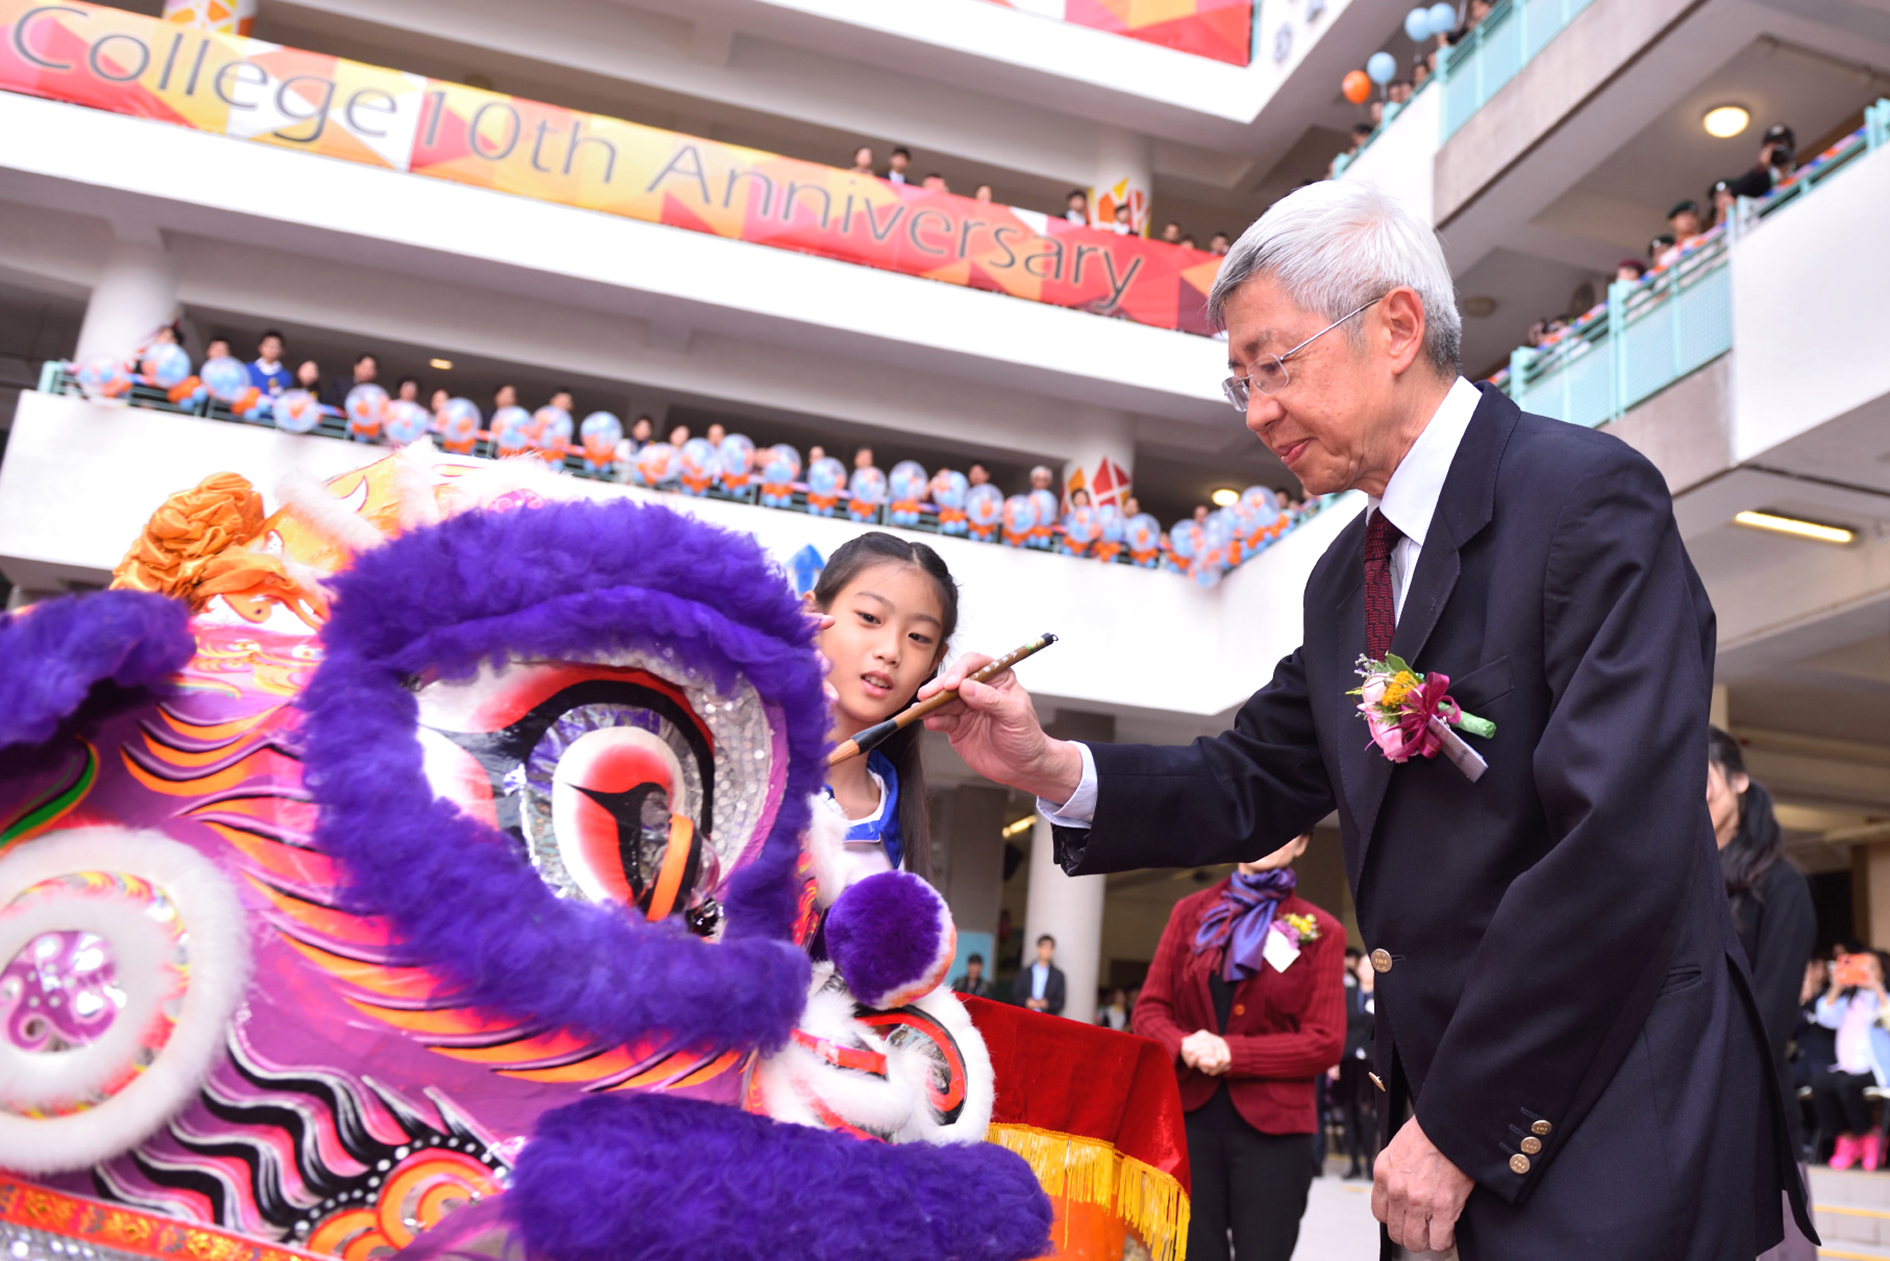 Prof. Cheng took part in a traditional eye-dotting ceremony to kick off a ceremonial lion dance.